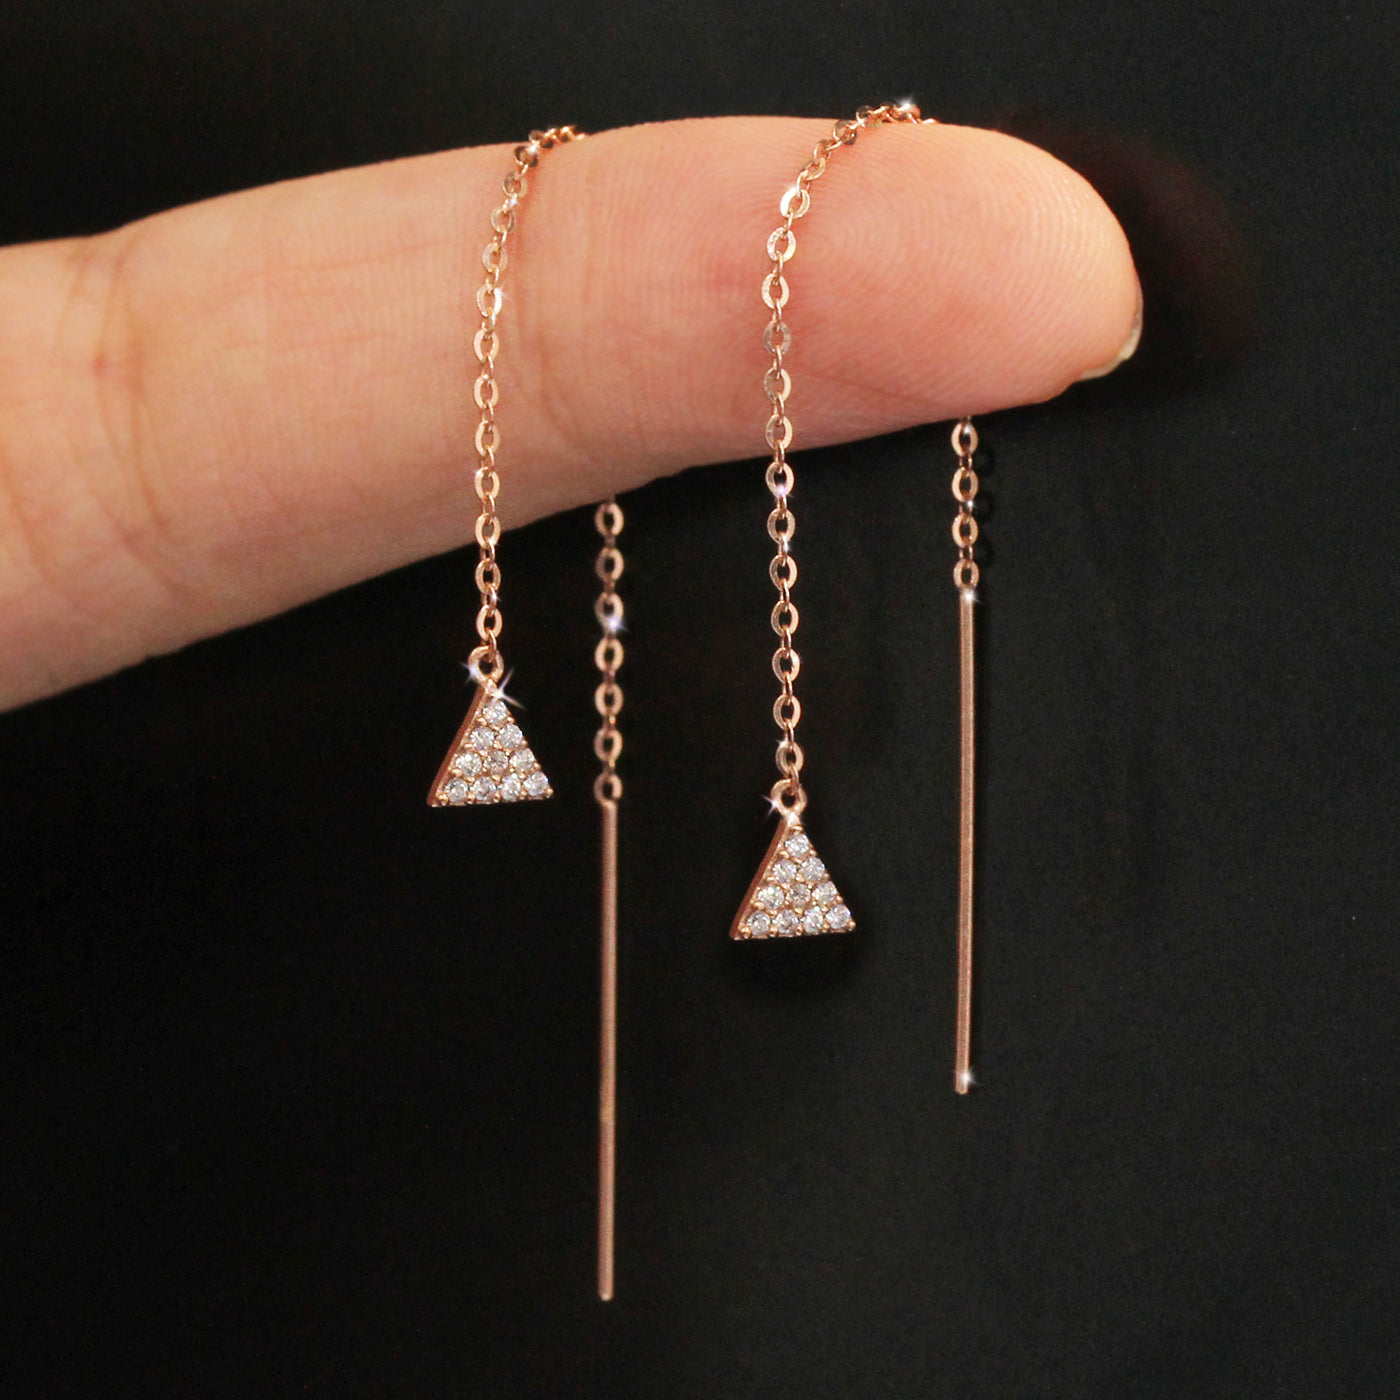 Pyramid Adjustable Chain Length Dangle Threader Earrings, Solid 14K Rose Gold